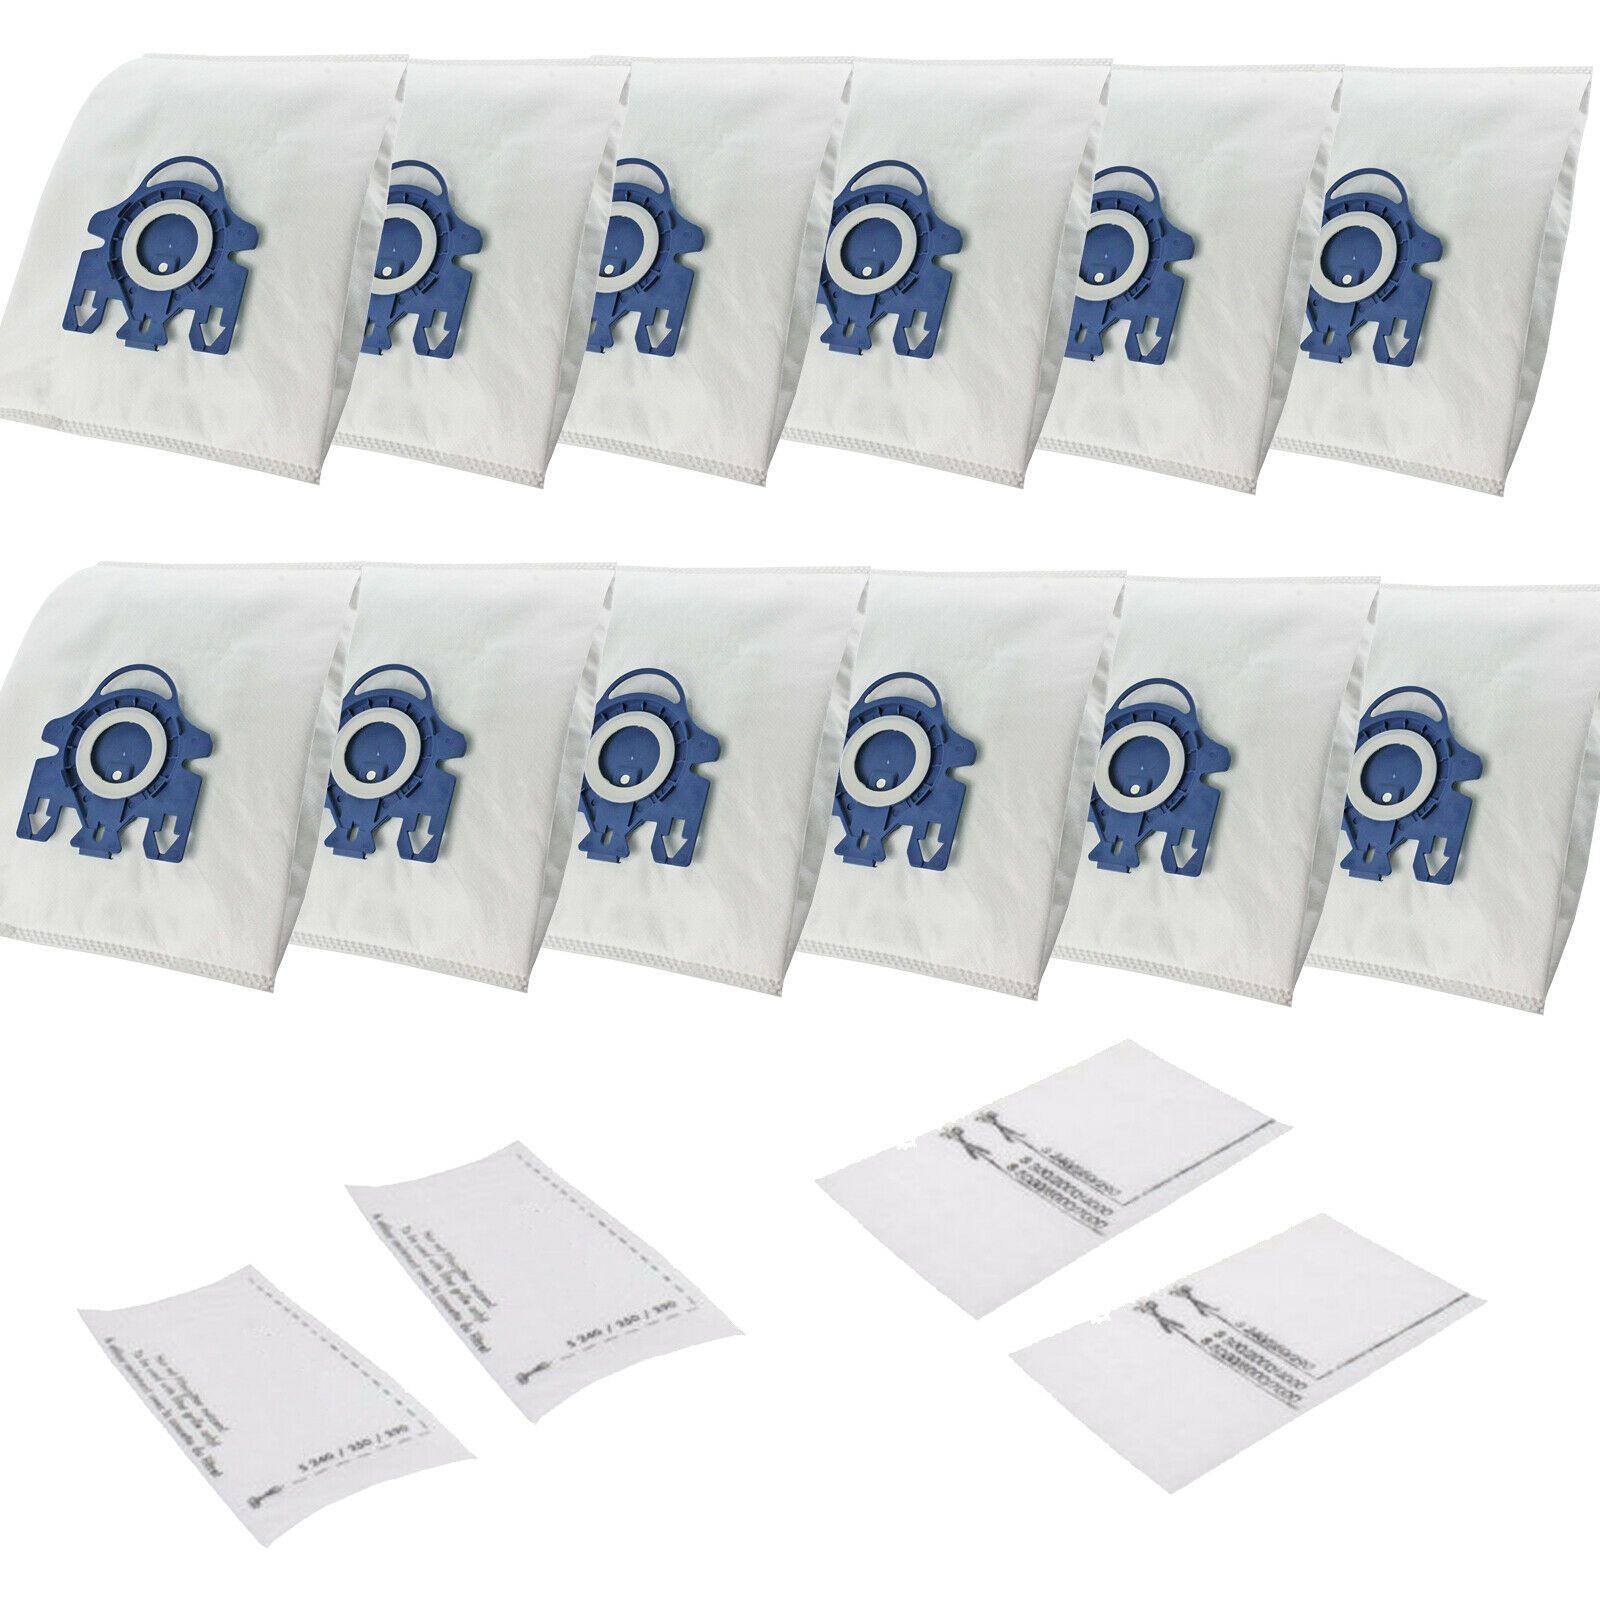 12 Bags + 8 Filter For Miele HYCLEAN GN Blue S2 S3 S4 S5 S243I S501 S600 S700 Sparesbarn